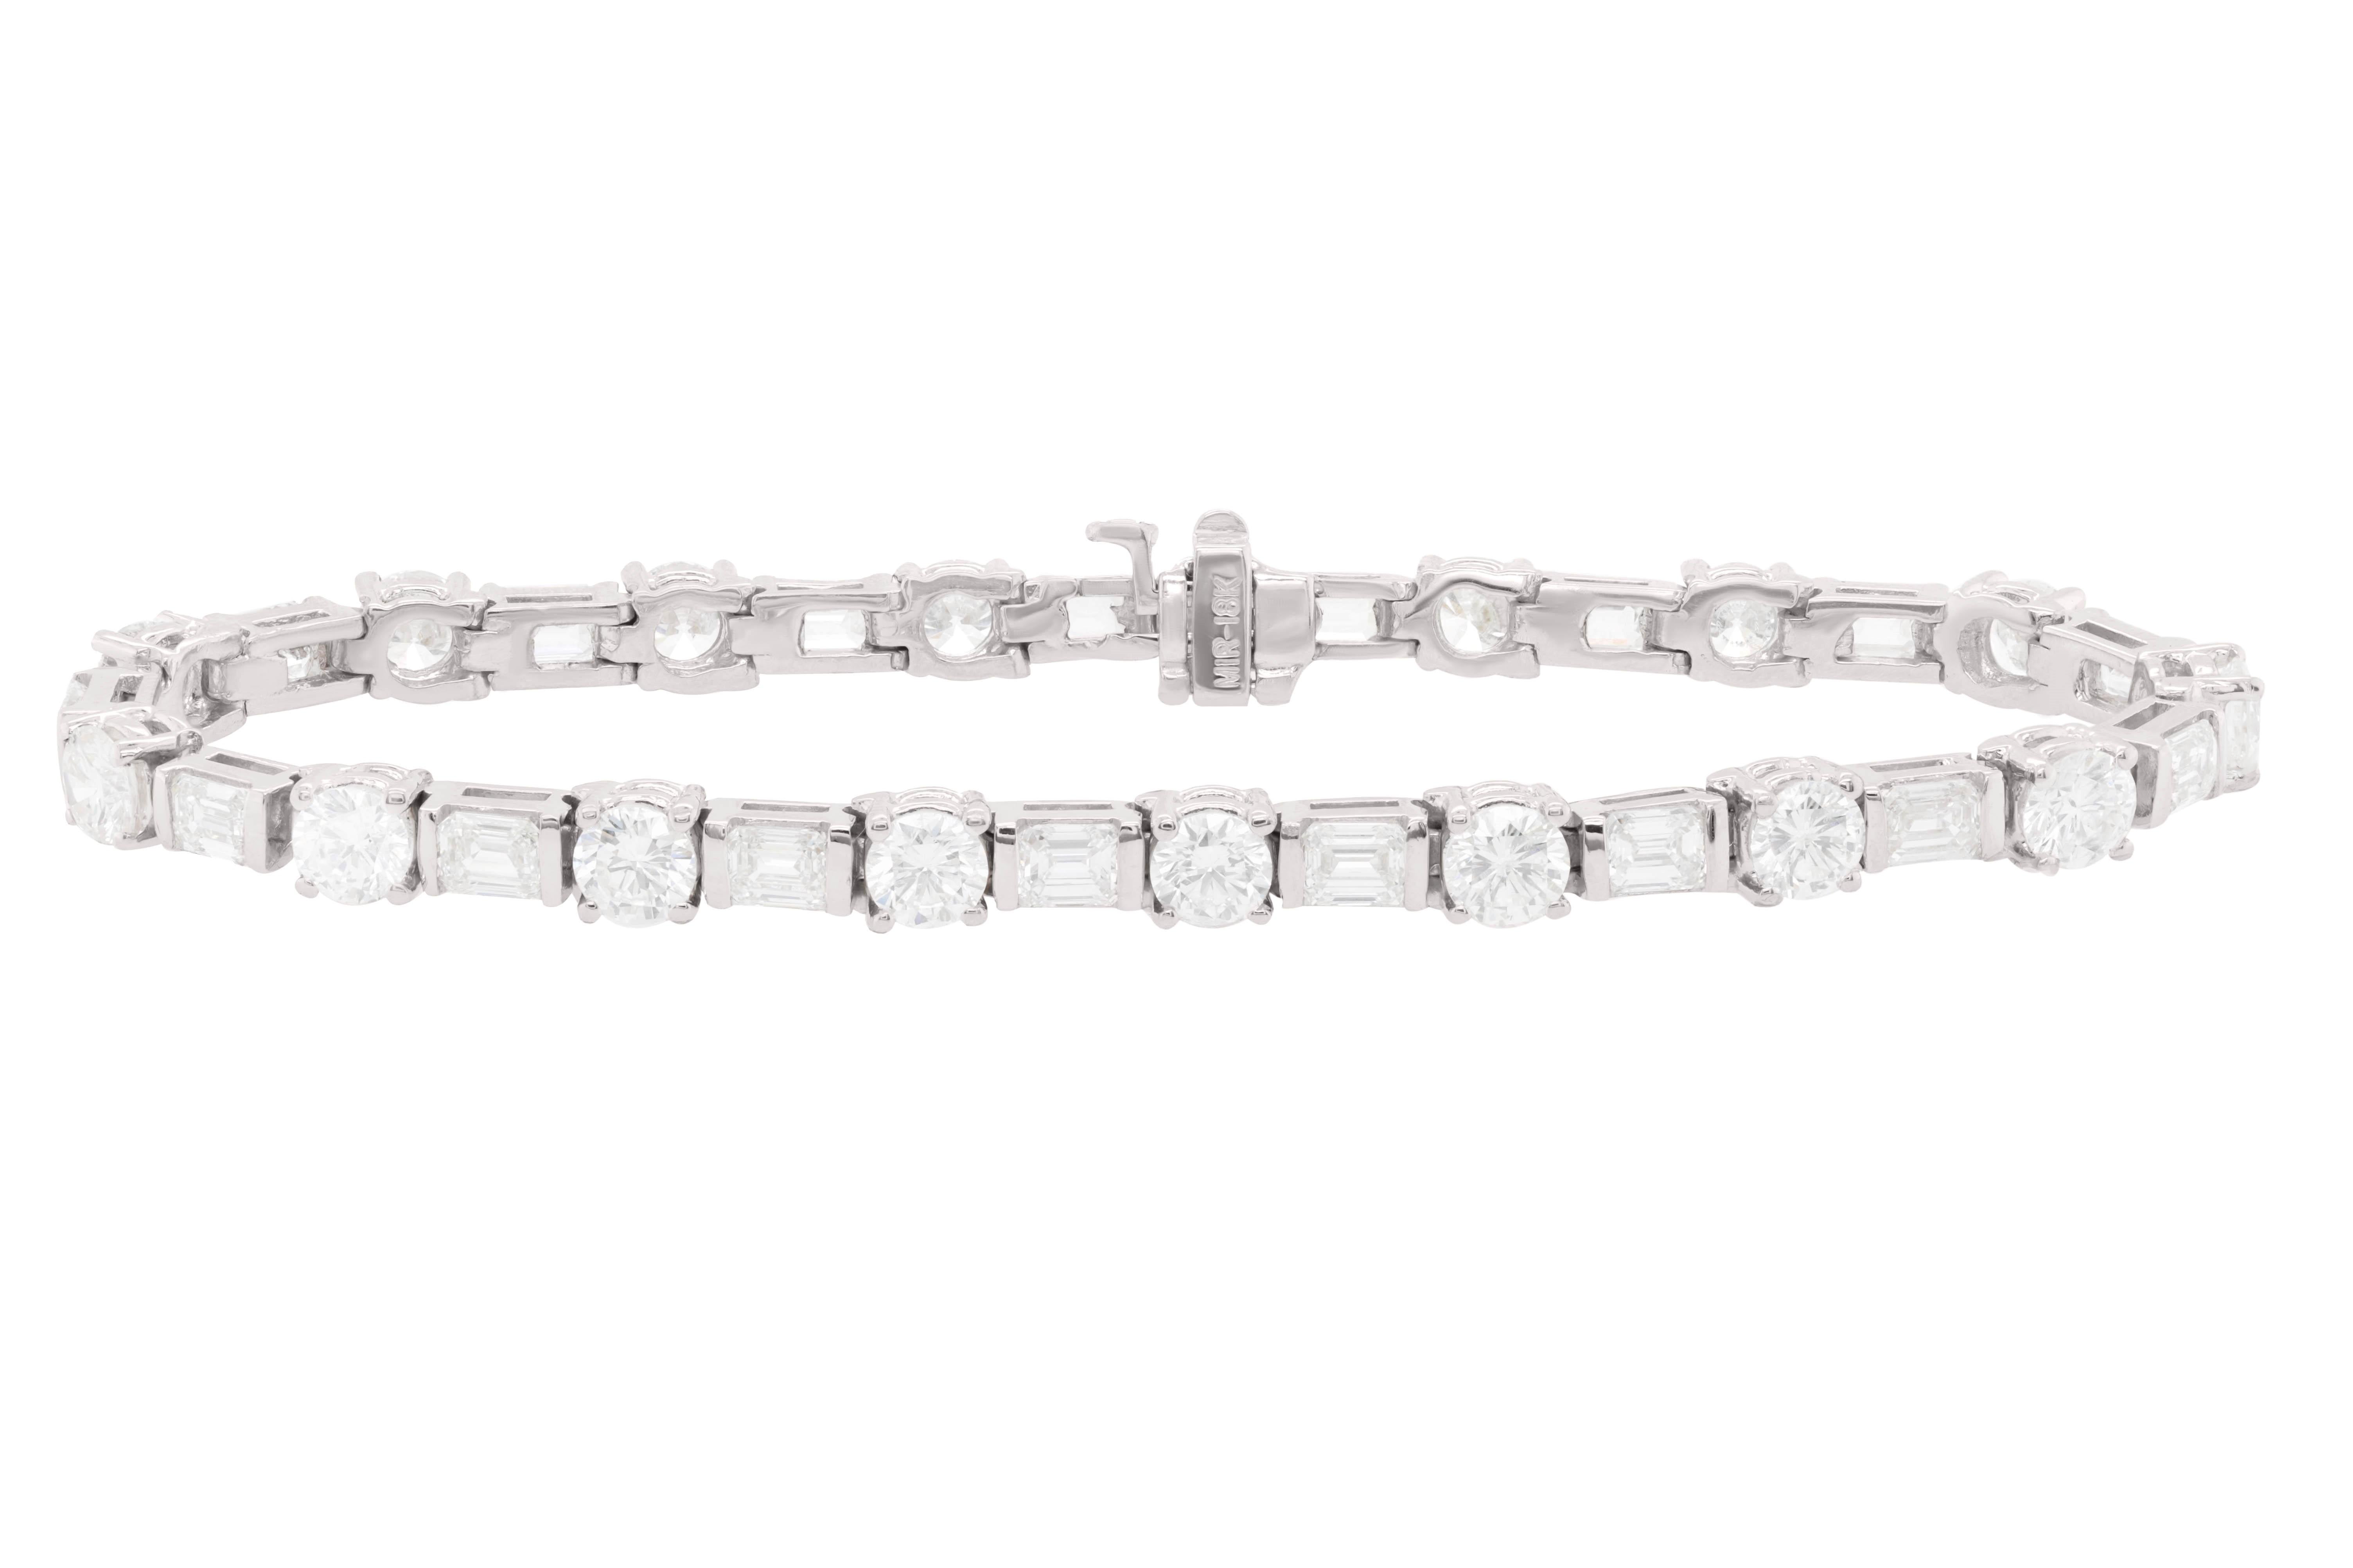 Platinum diamond tennis bracelet adorned with 12.70 cts tw of alternating horizontally set baguette cut and round diamonds (32 stones)
Diana M. is a leading supplier of top-quality fine jewelry for over 35 years.
Diana M is one-stop shop for all